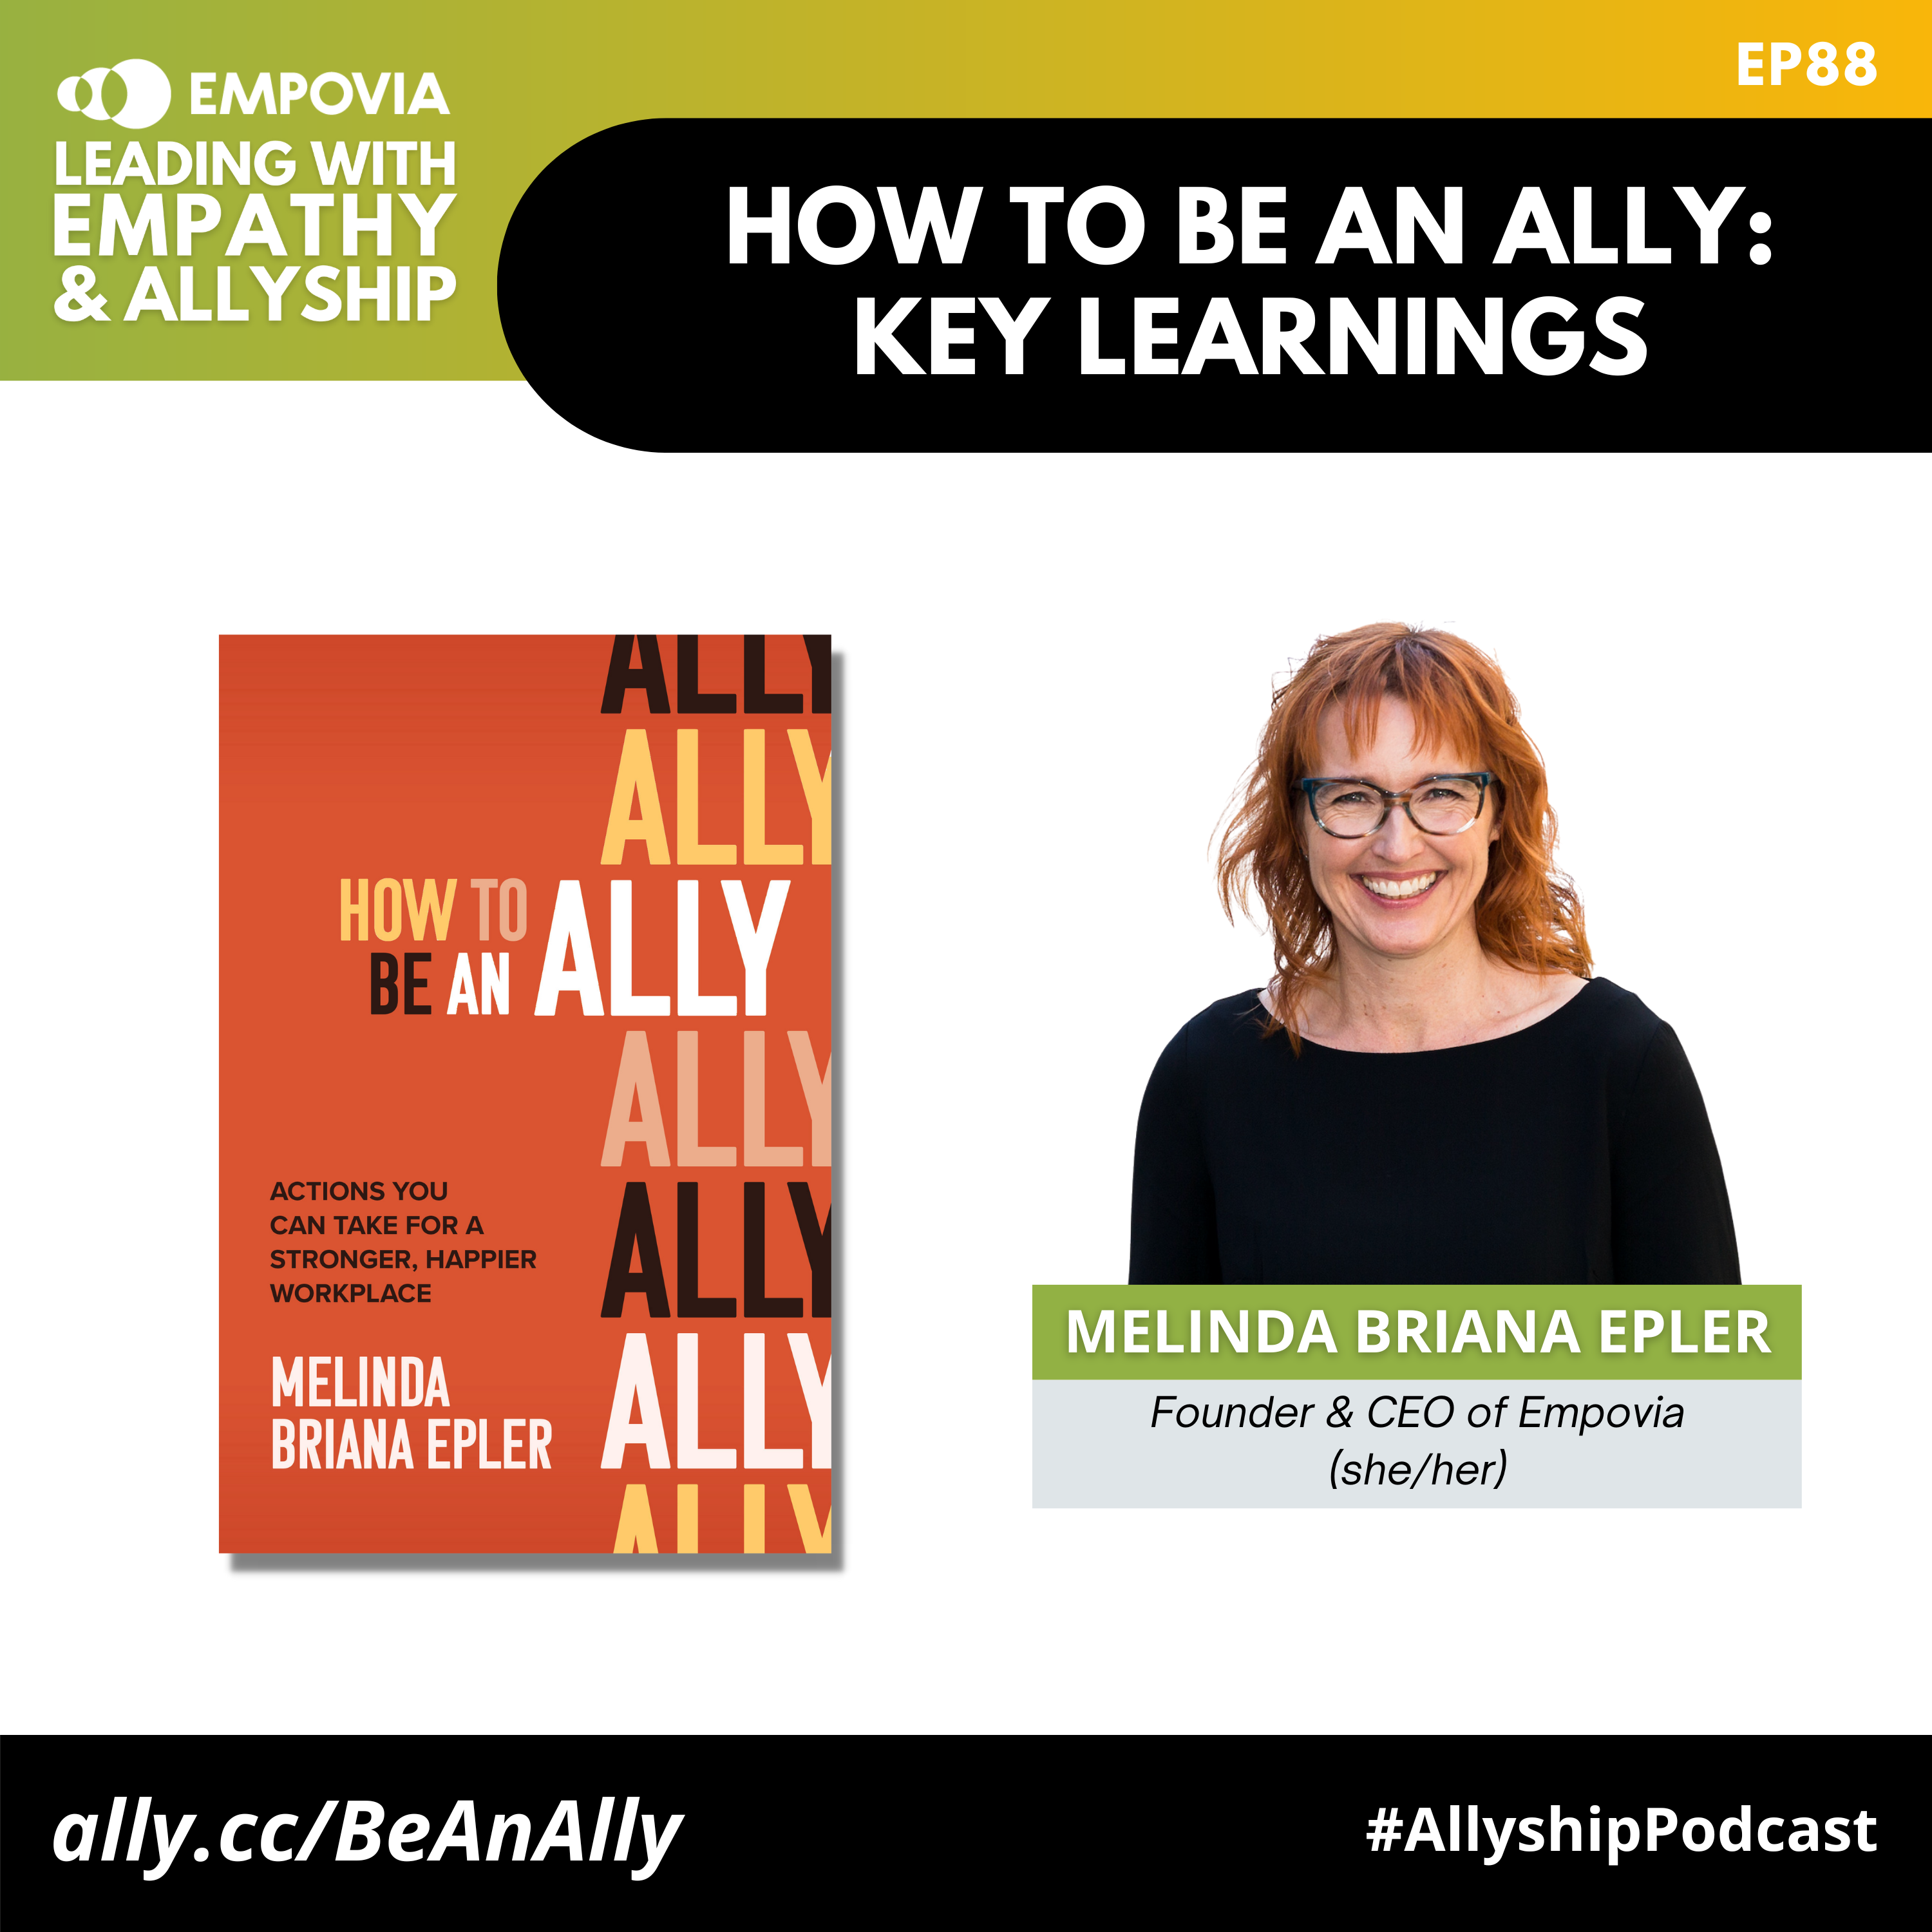 Leading With Empathy & Allyship promo and a photo of host Melinda Briana Epler, a White woman with red hair, glasses, and a black shirt; beside her is the orange book cover of HOW TO BE AN ALLY: ACTIONS YOU CAN TAKE FOR A STRONGER, HAPPIER WORKPLACE.